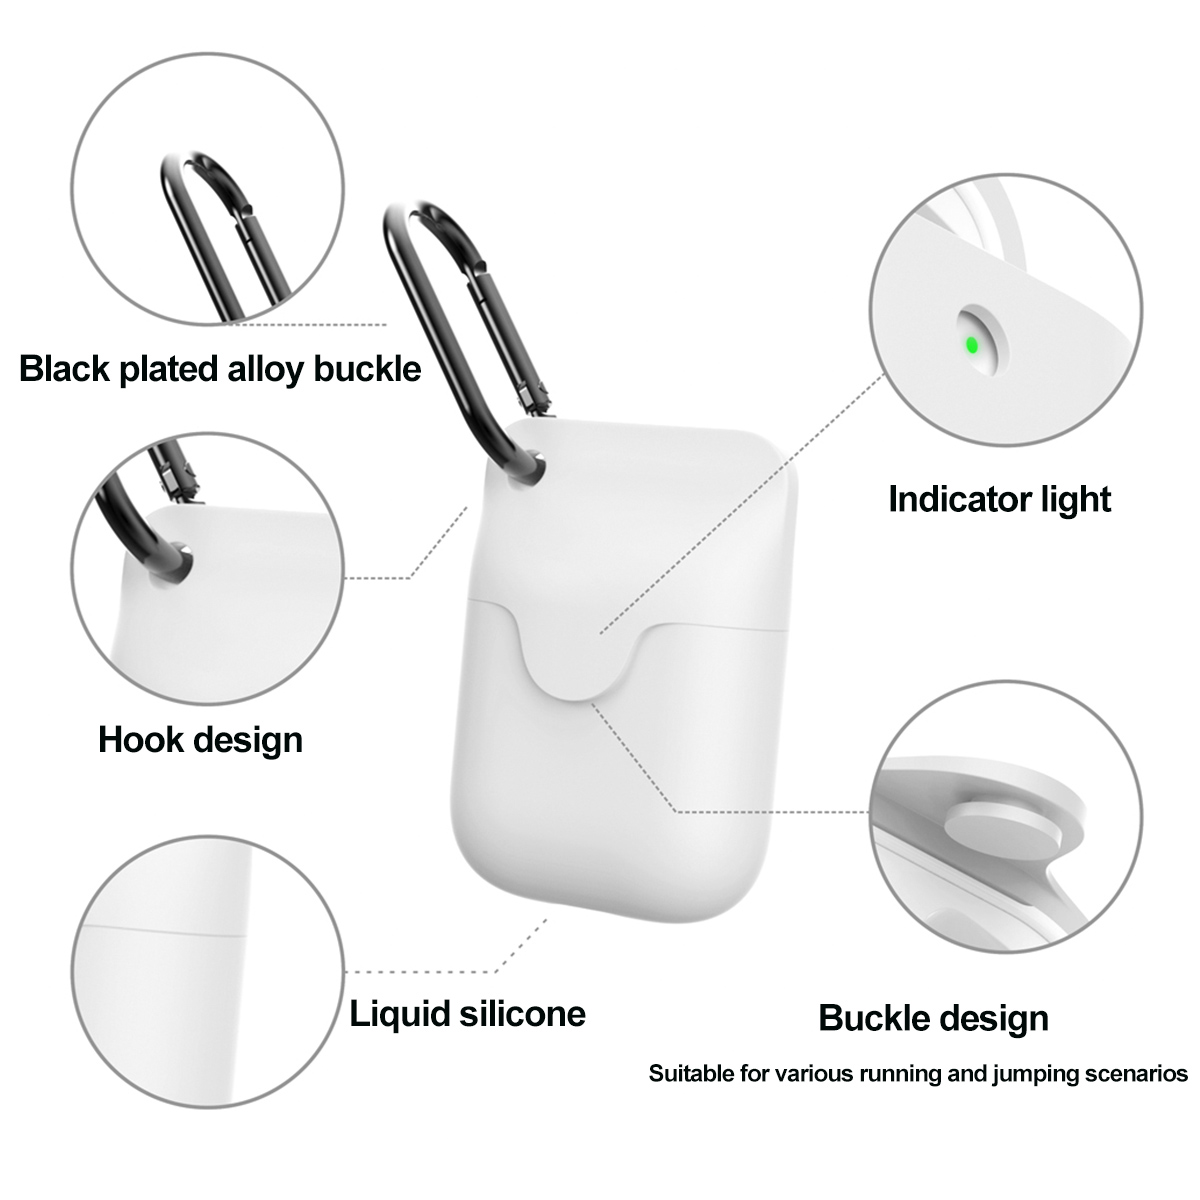 Liquid-Silicone-Shockproof-Waterproof-Earphone-Storage-Case-with-KeyChain-for-Apple-Airpods-1--2-1648016-3